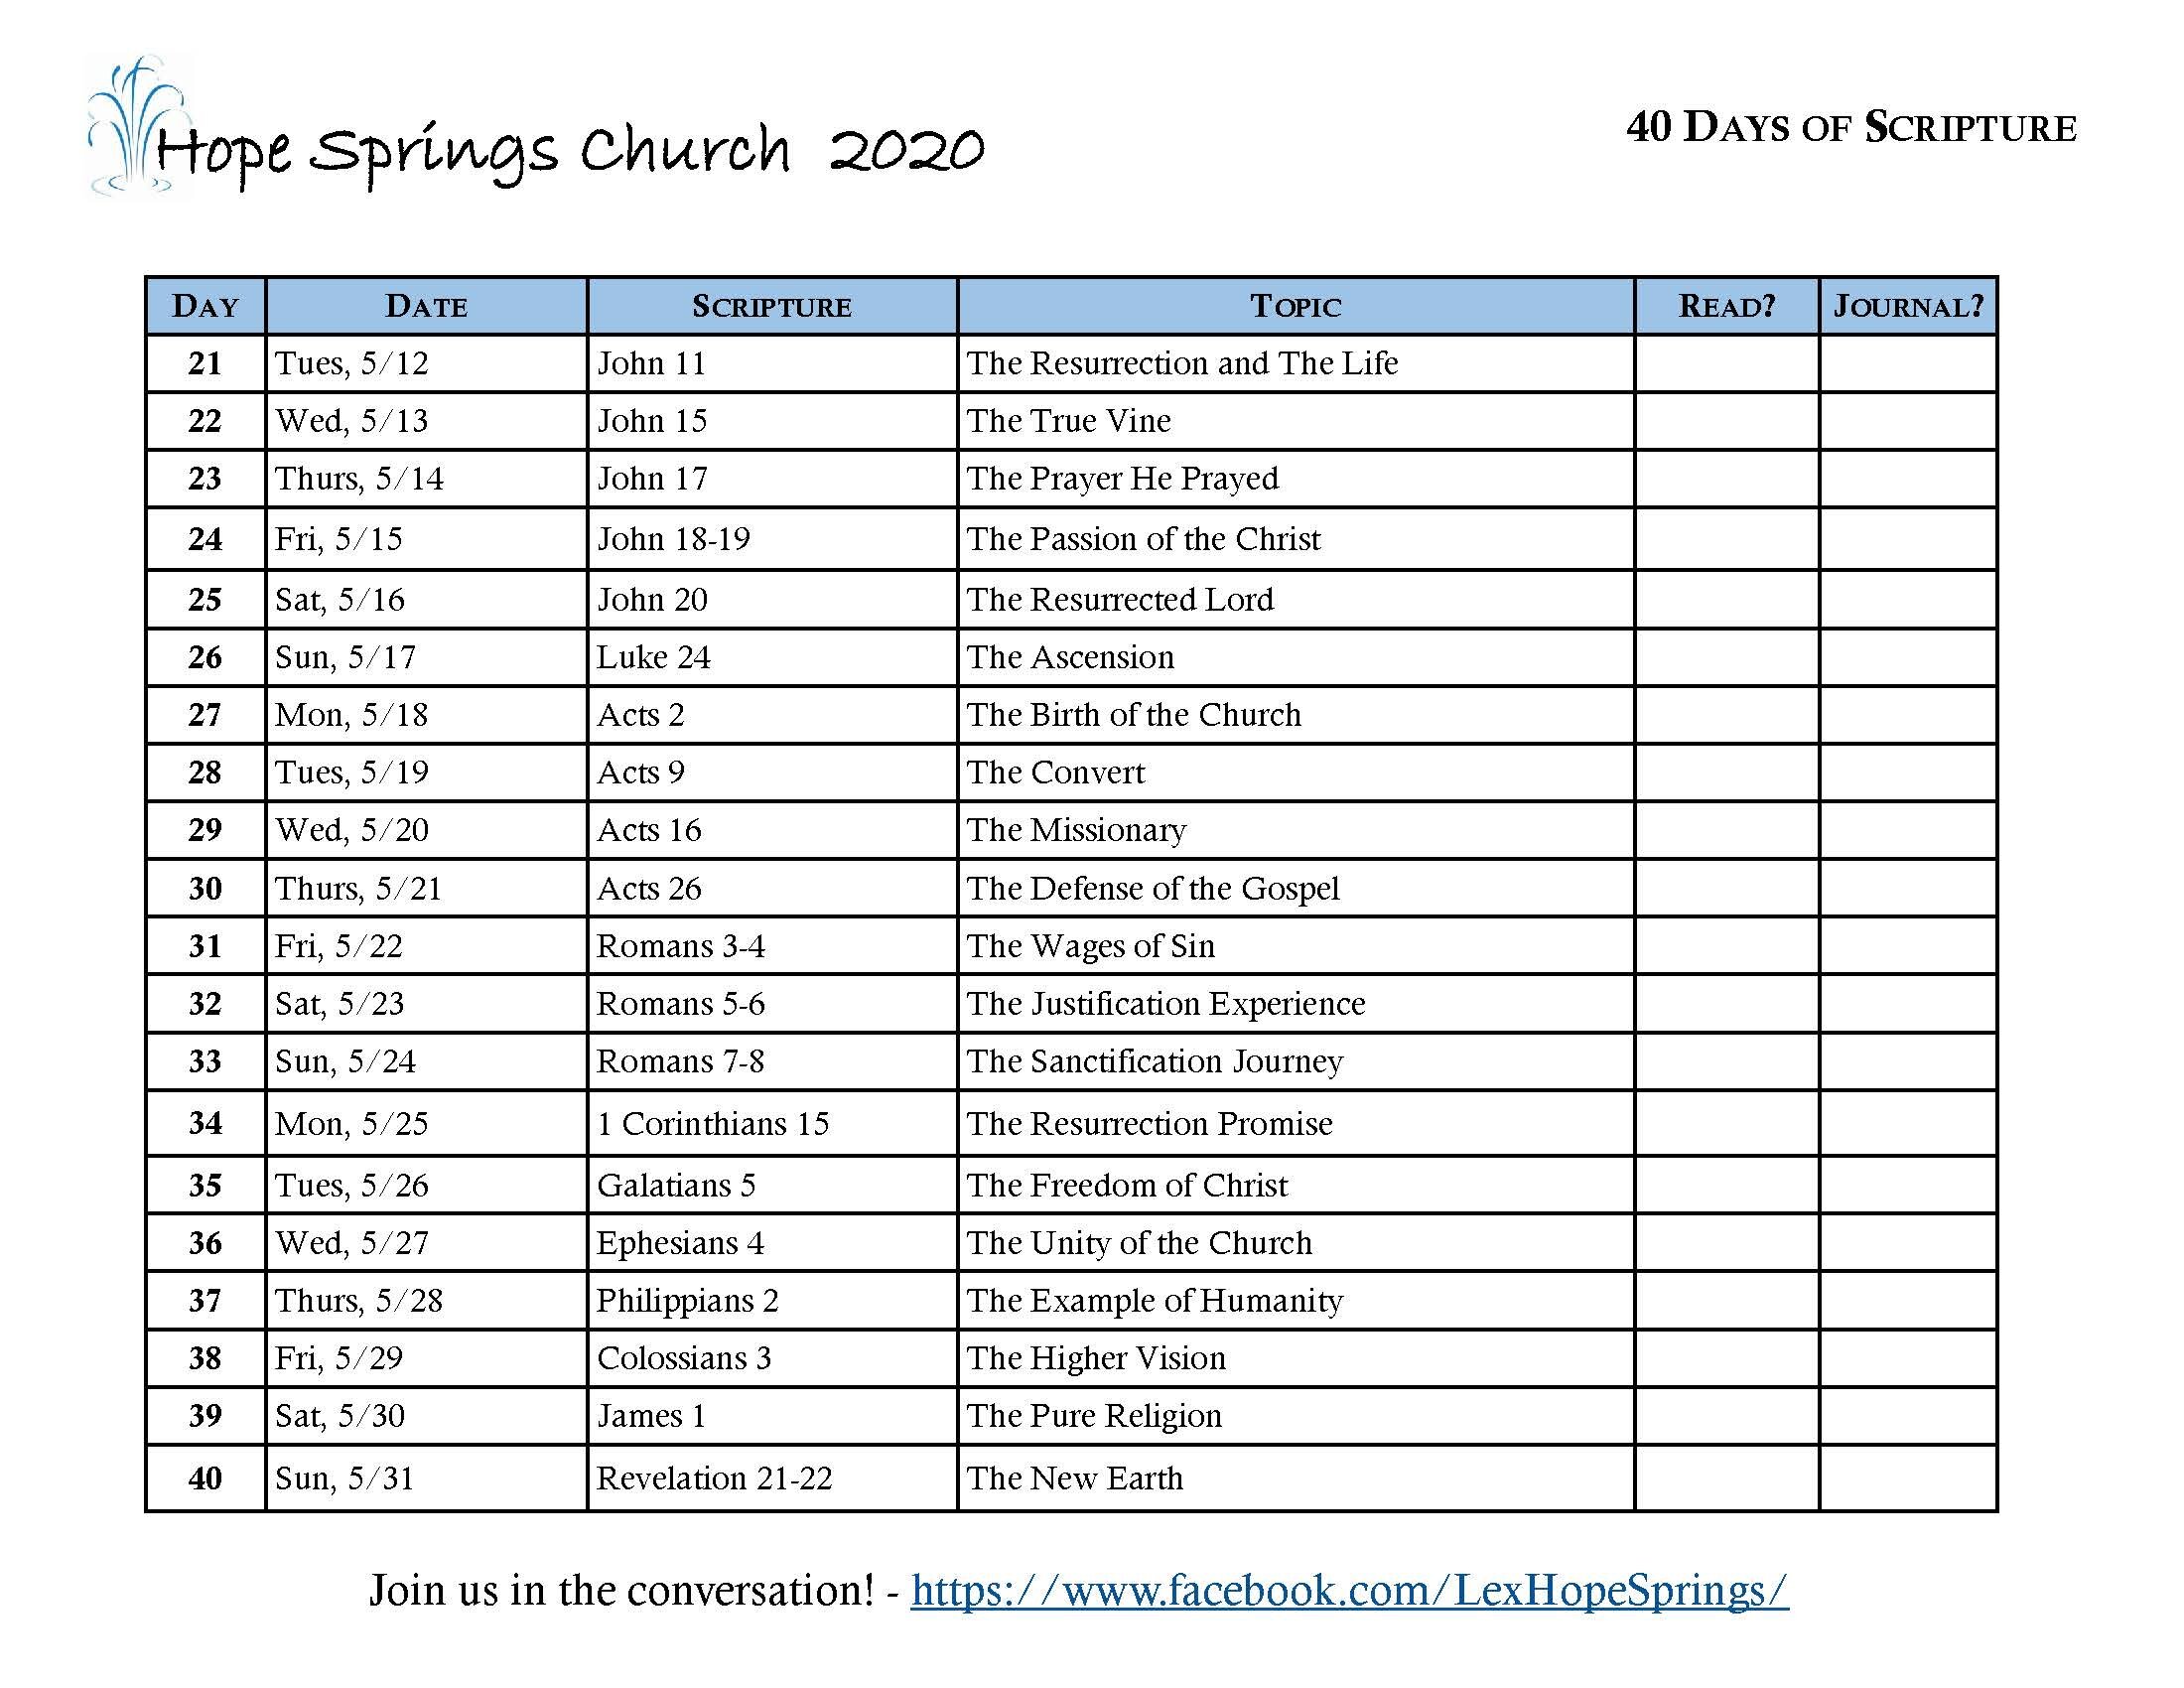 40 Day Scriptures_Page_2.jpg